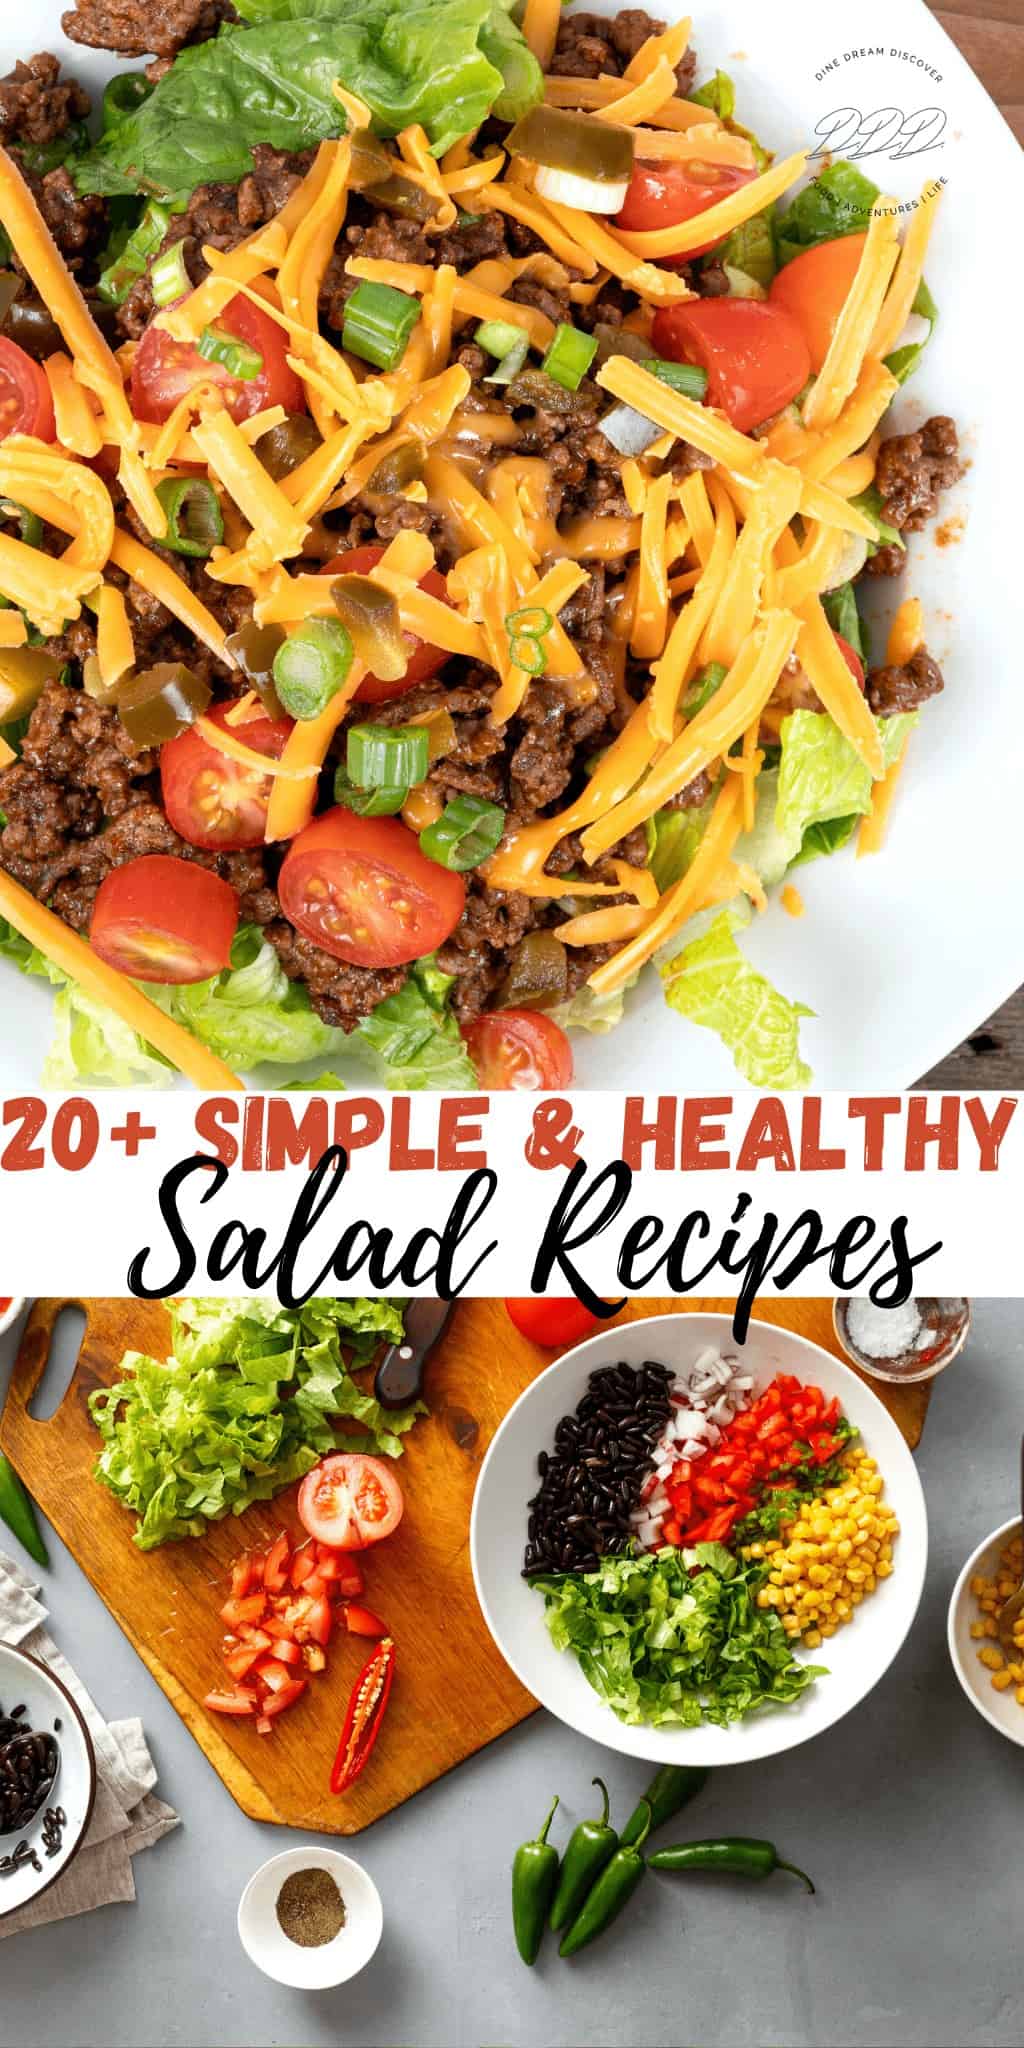 Simple and Healthy Salads